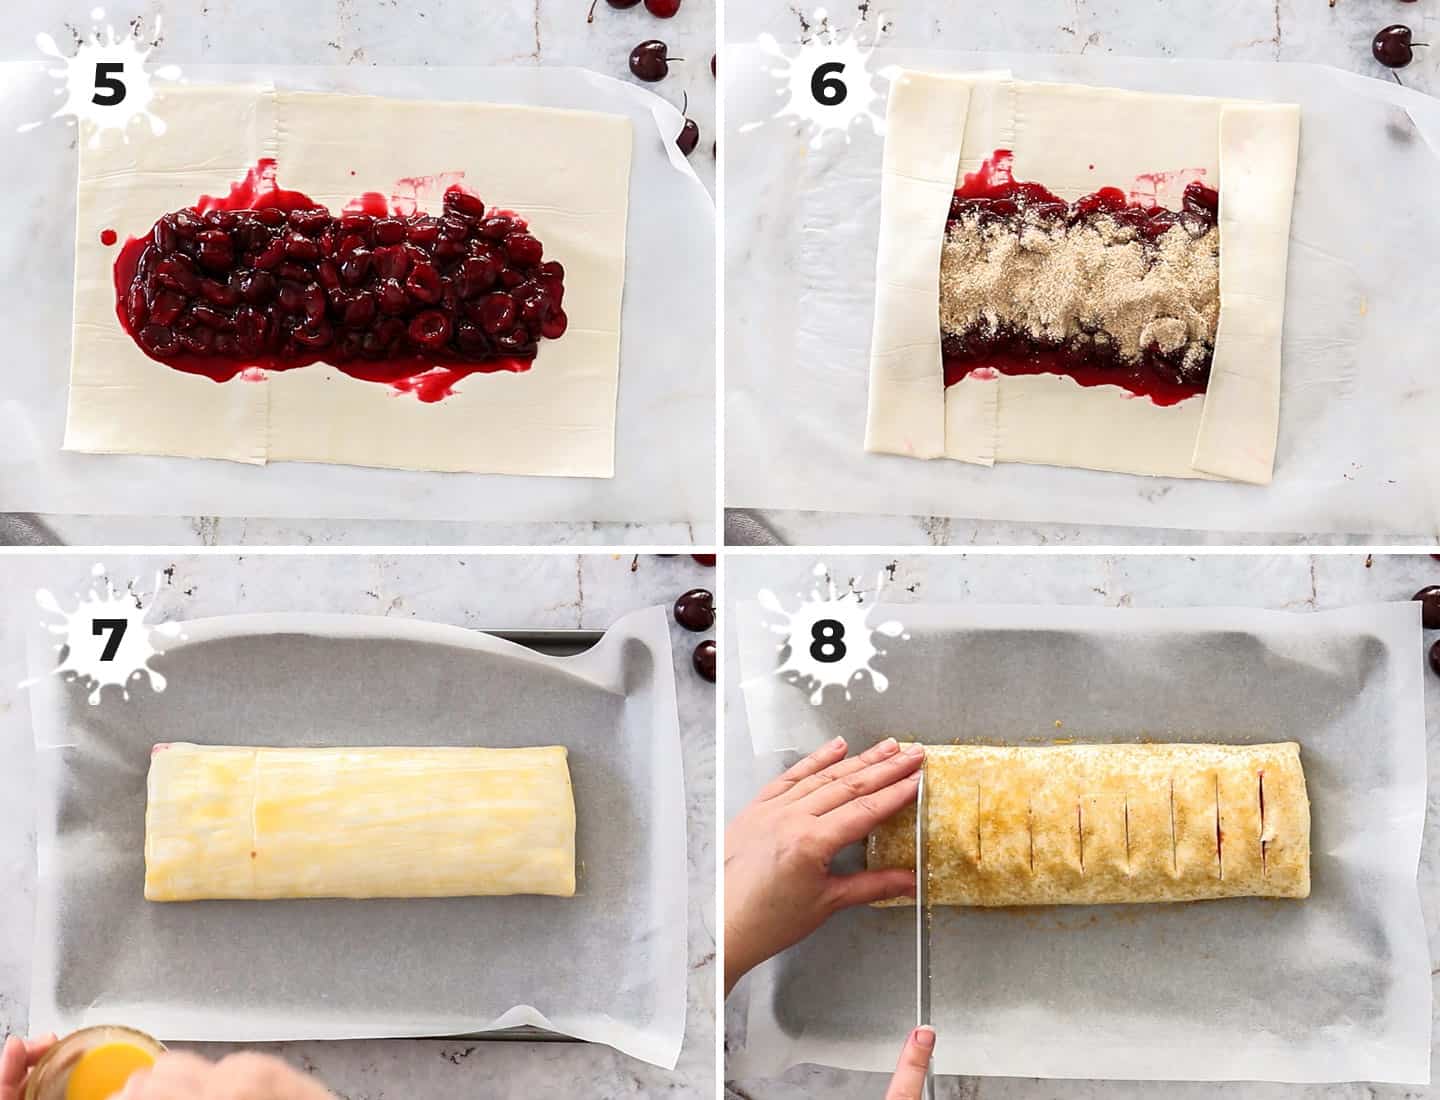 A collage of 4 images showing how to fill and roll the strudel.